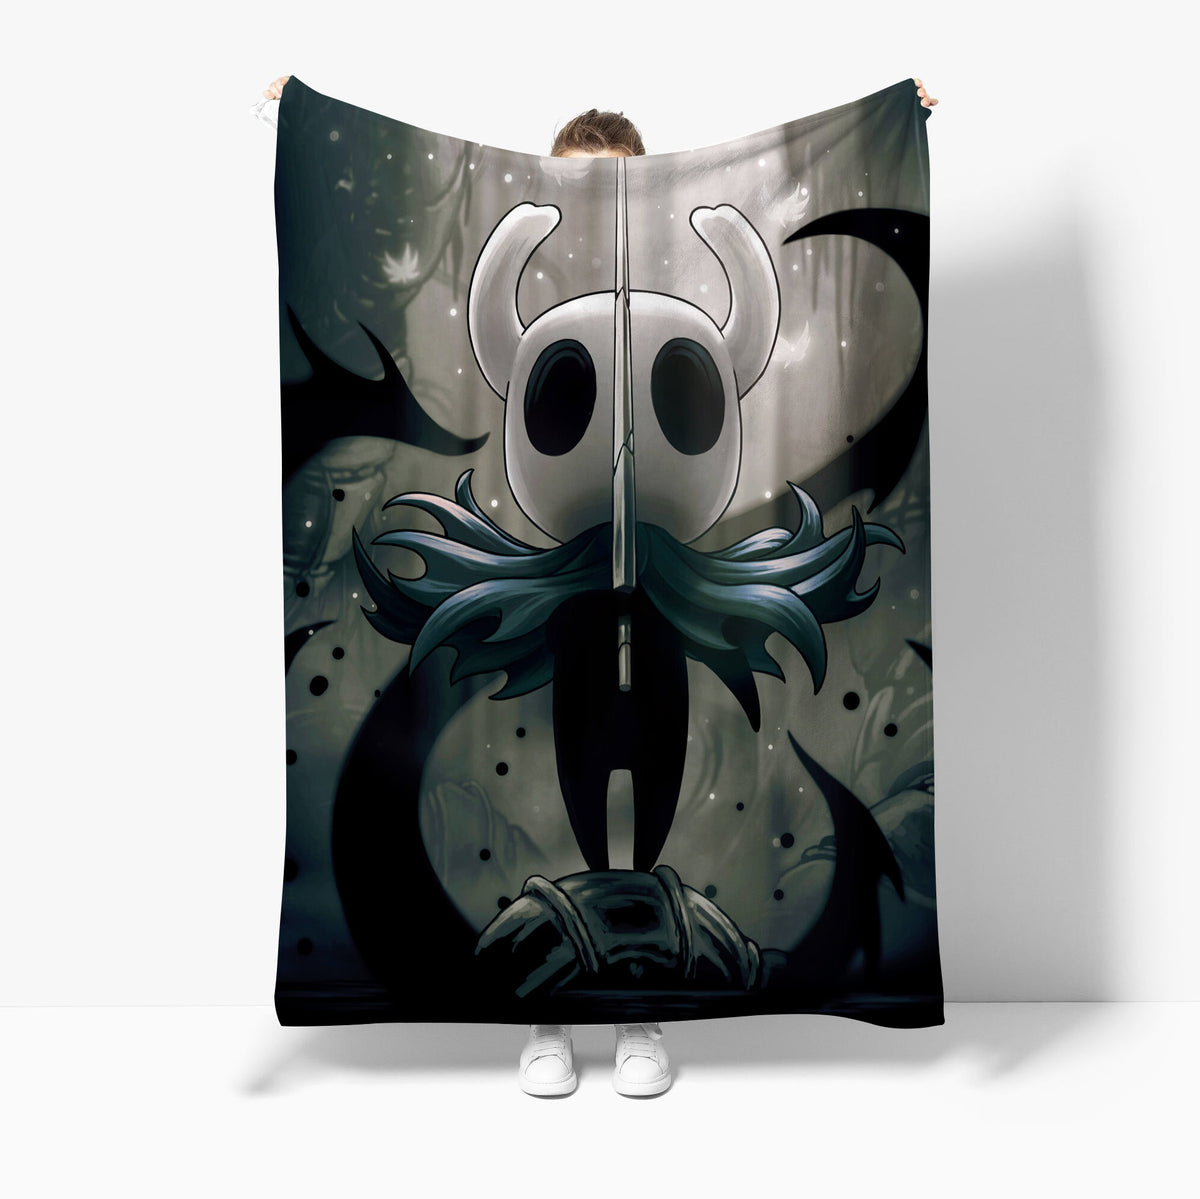 The Hollow Knight 3D Printed Plush Blanket Flannel Fleece Throw Warm Gift for Kids Adults Home Office